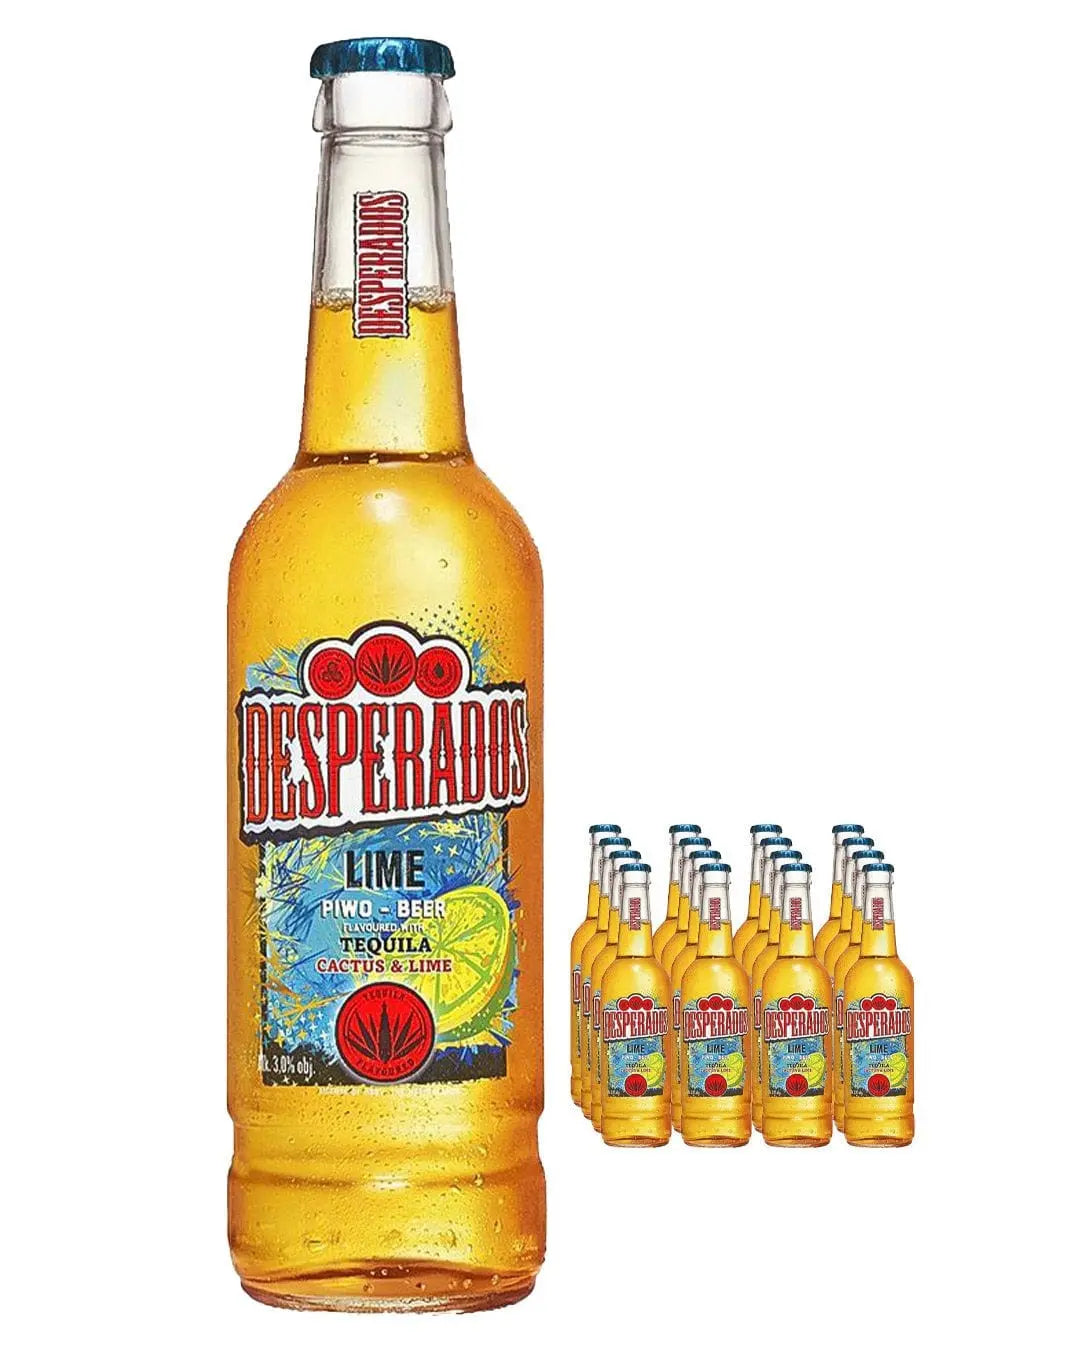 Desperados Lime light beer flavored with tequila 500 ml